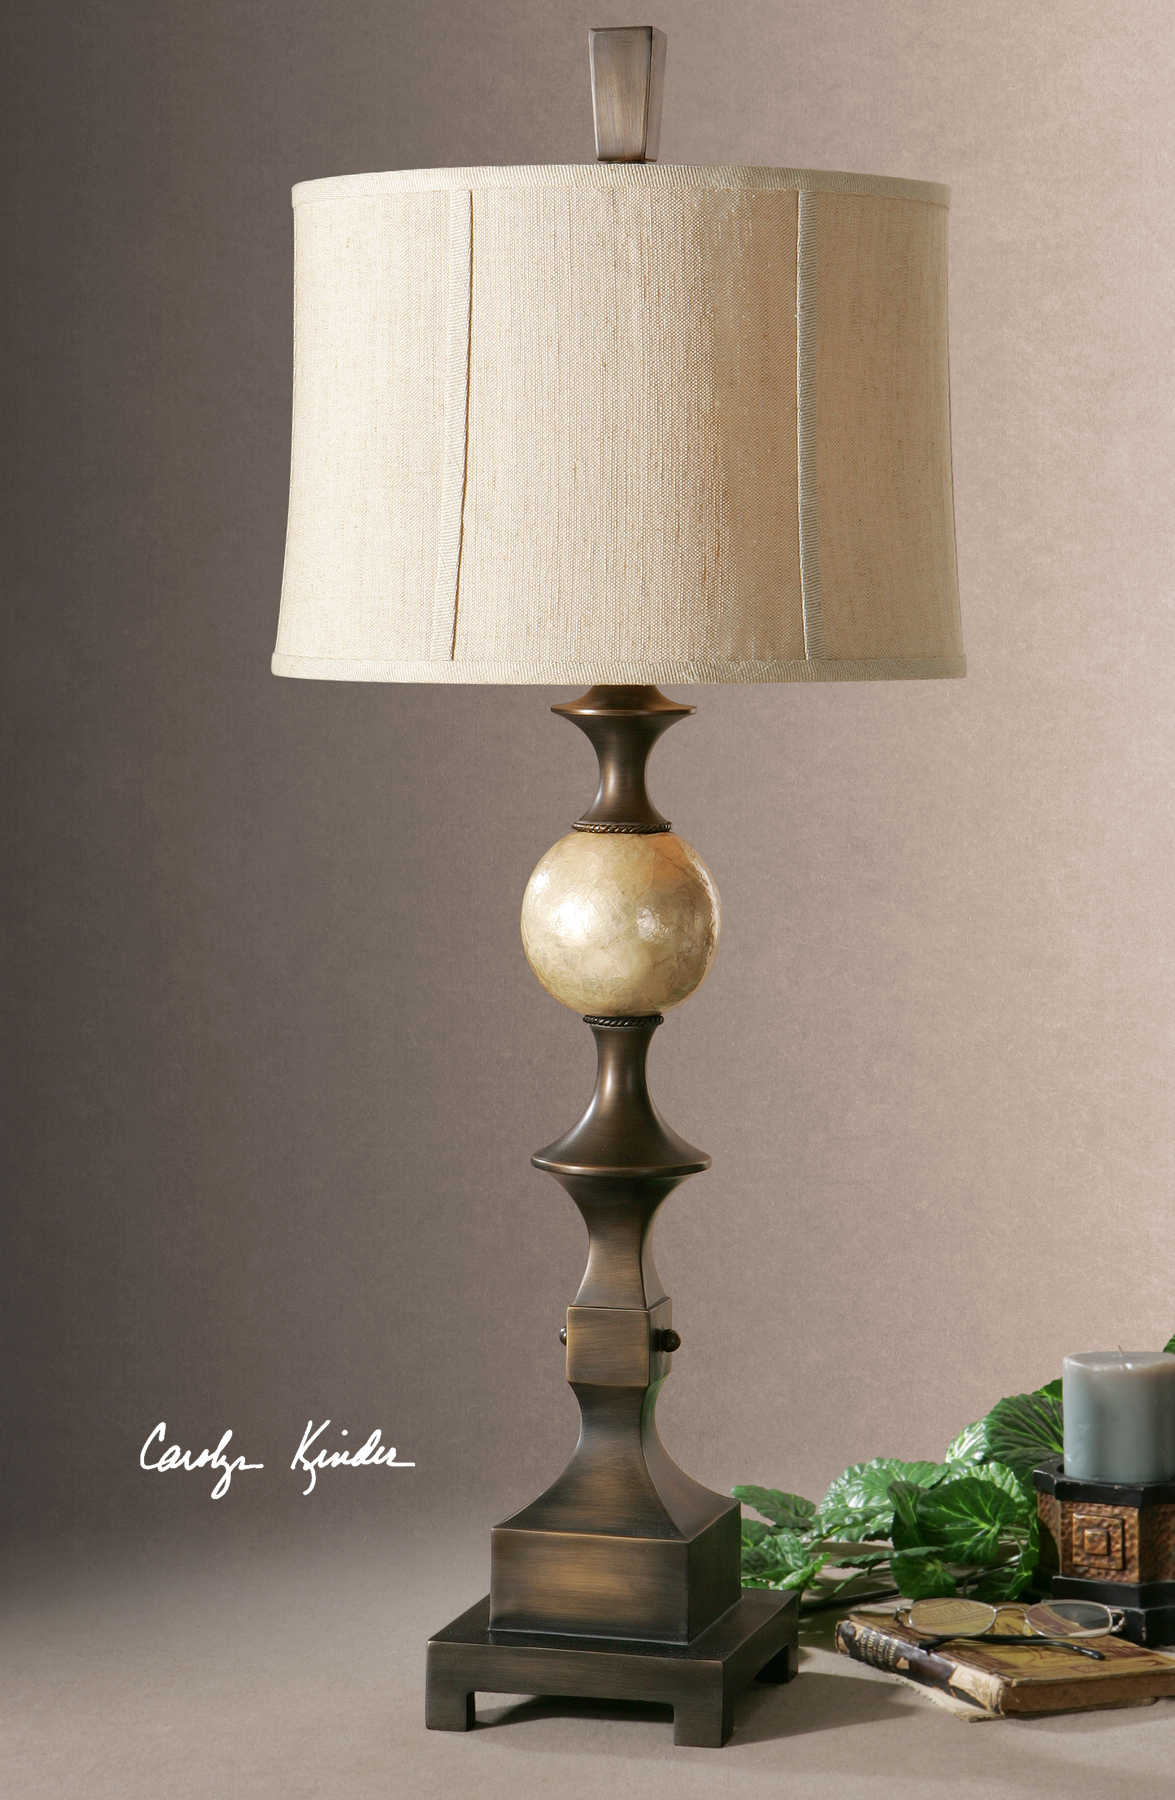 Tusciano Table Lamp Uttermost with size 1175 X 1800